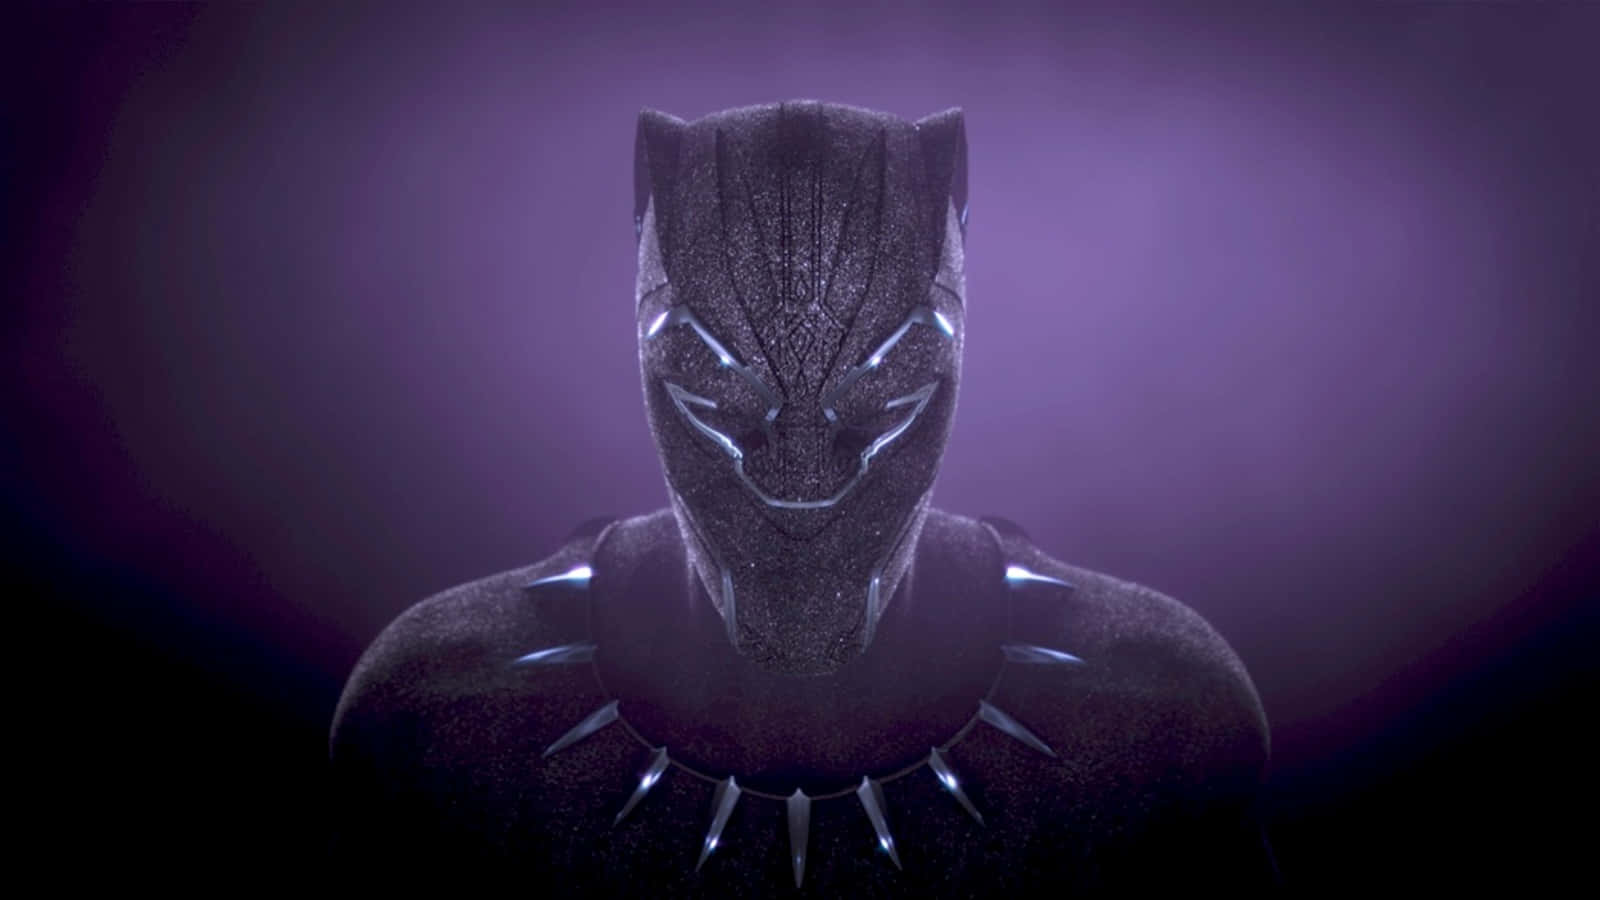 Get Ready To Take Flight in the Vibranium Suit Wallpaper